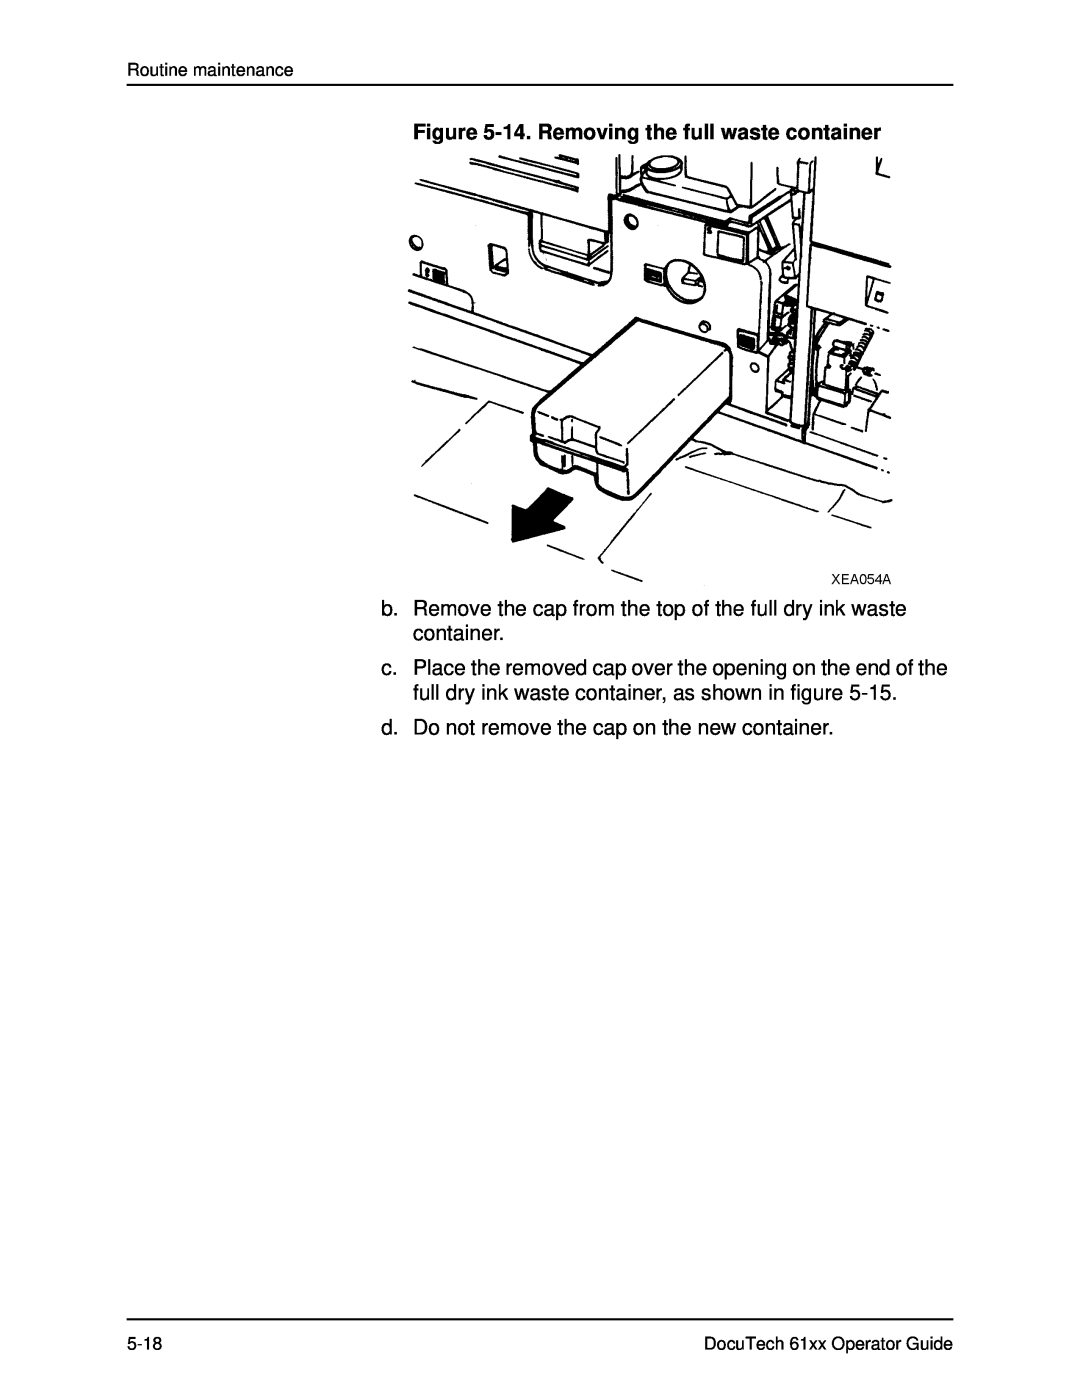 Xerox 61xx manual 14. Removing the full waste container, b. Remove the cap from the top of the full dry ink waste container 